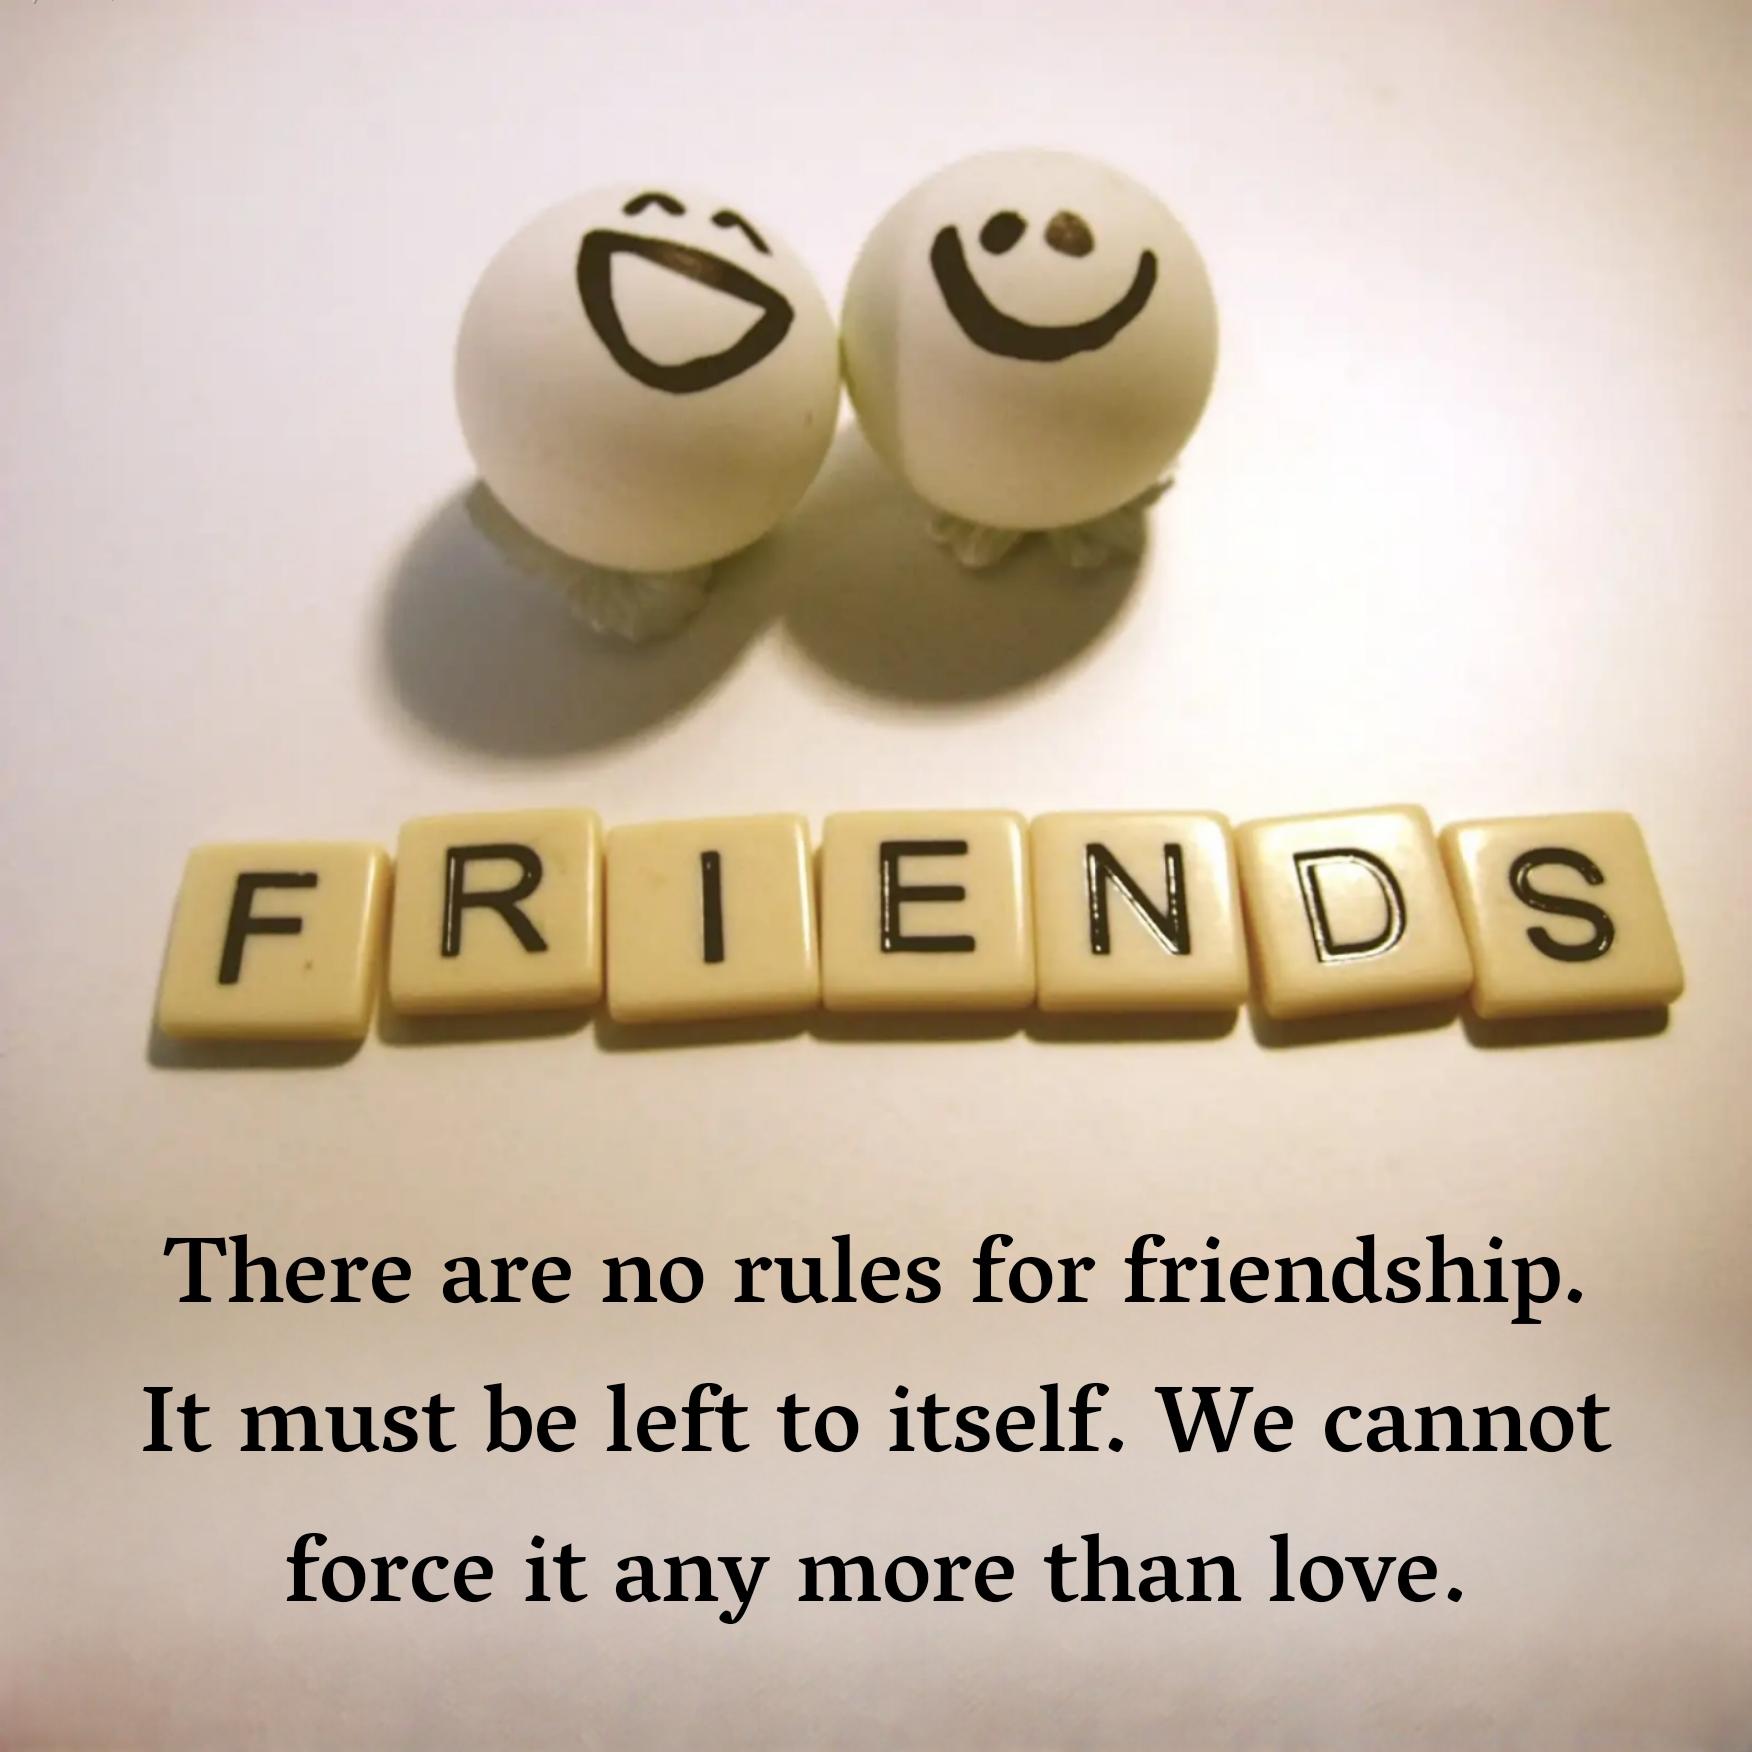 There are no rules for friendship It must be left to itself